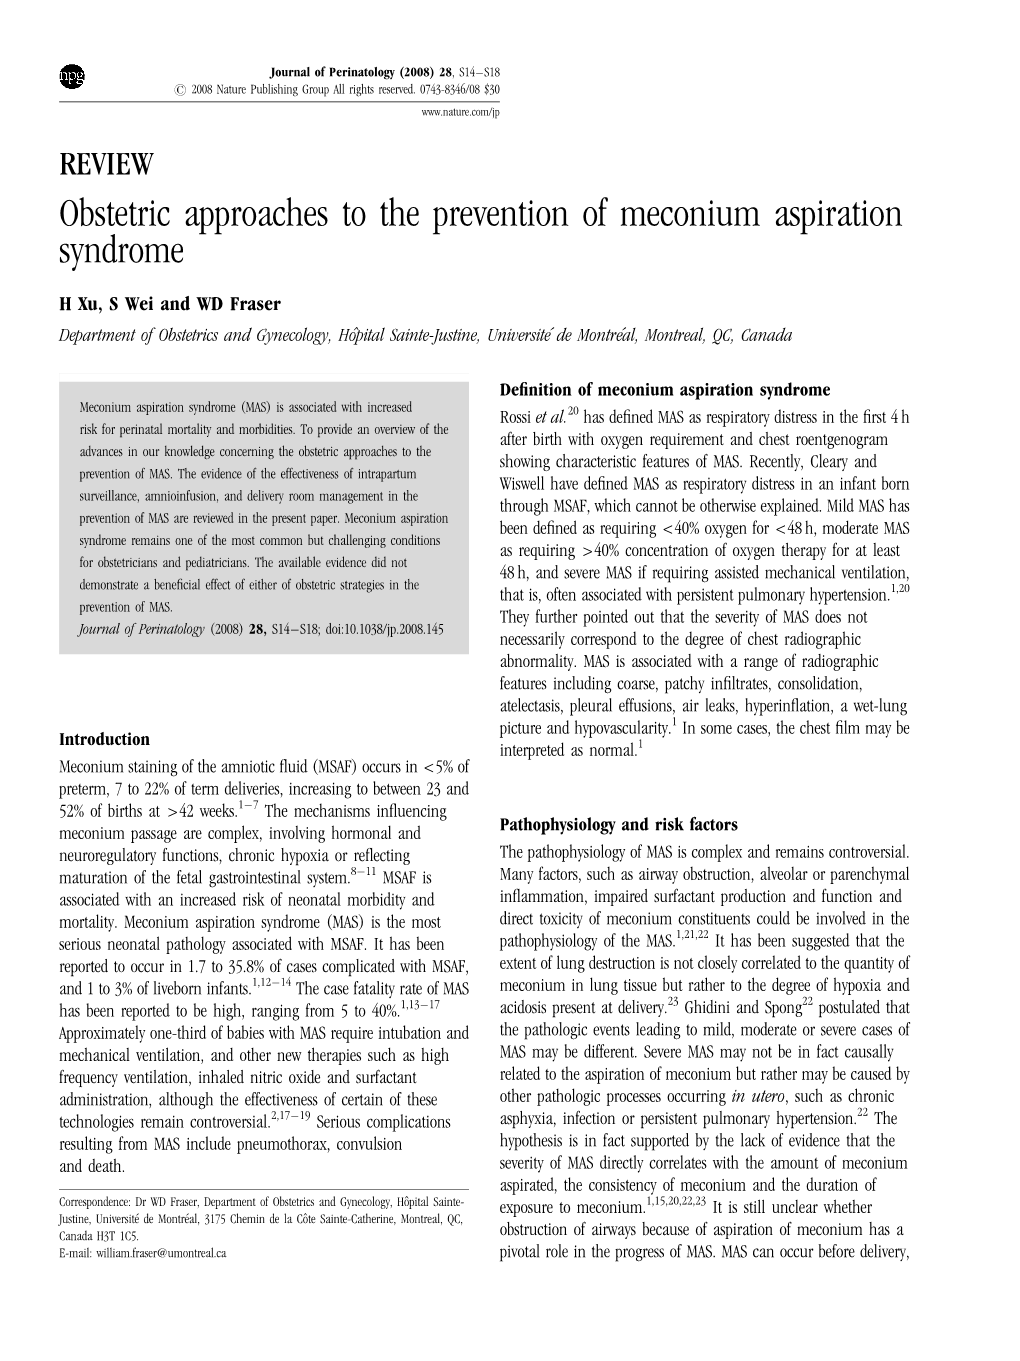 REVIEW Obstetric Approaches to the Prevention of Meconium Aspiration Syndrome